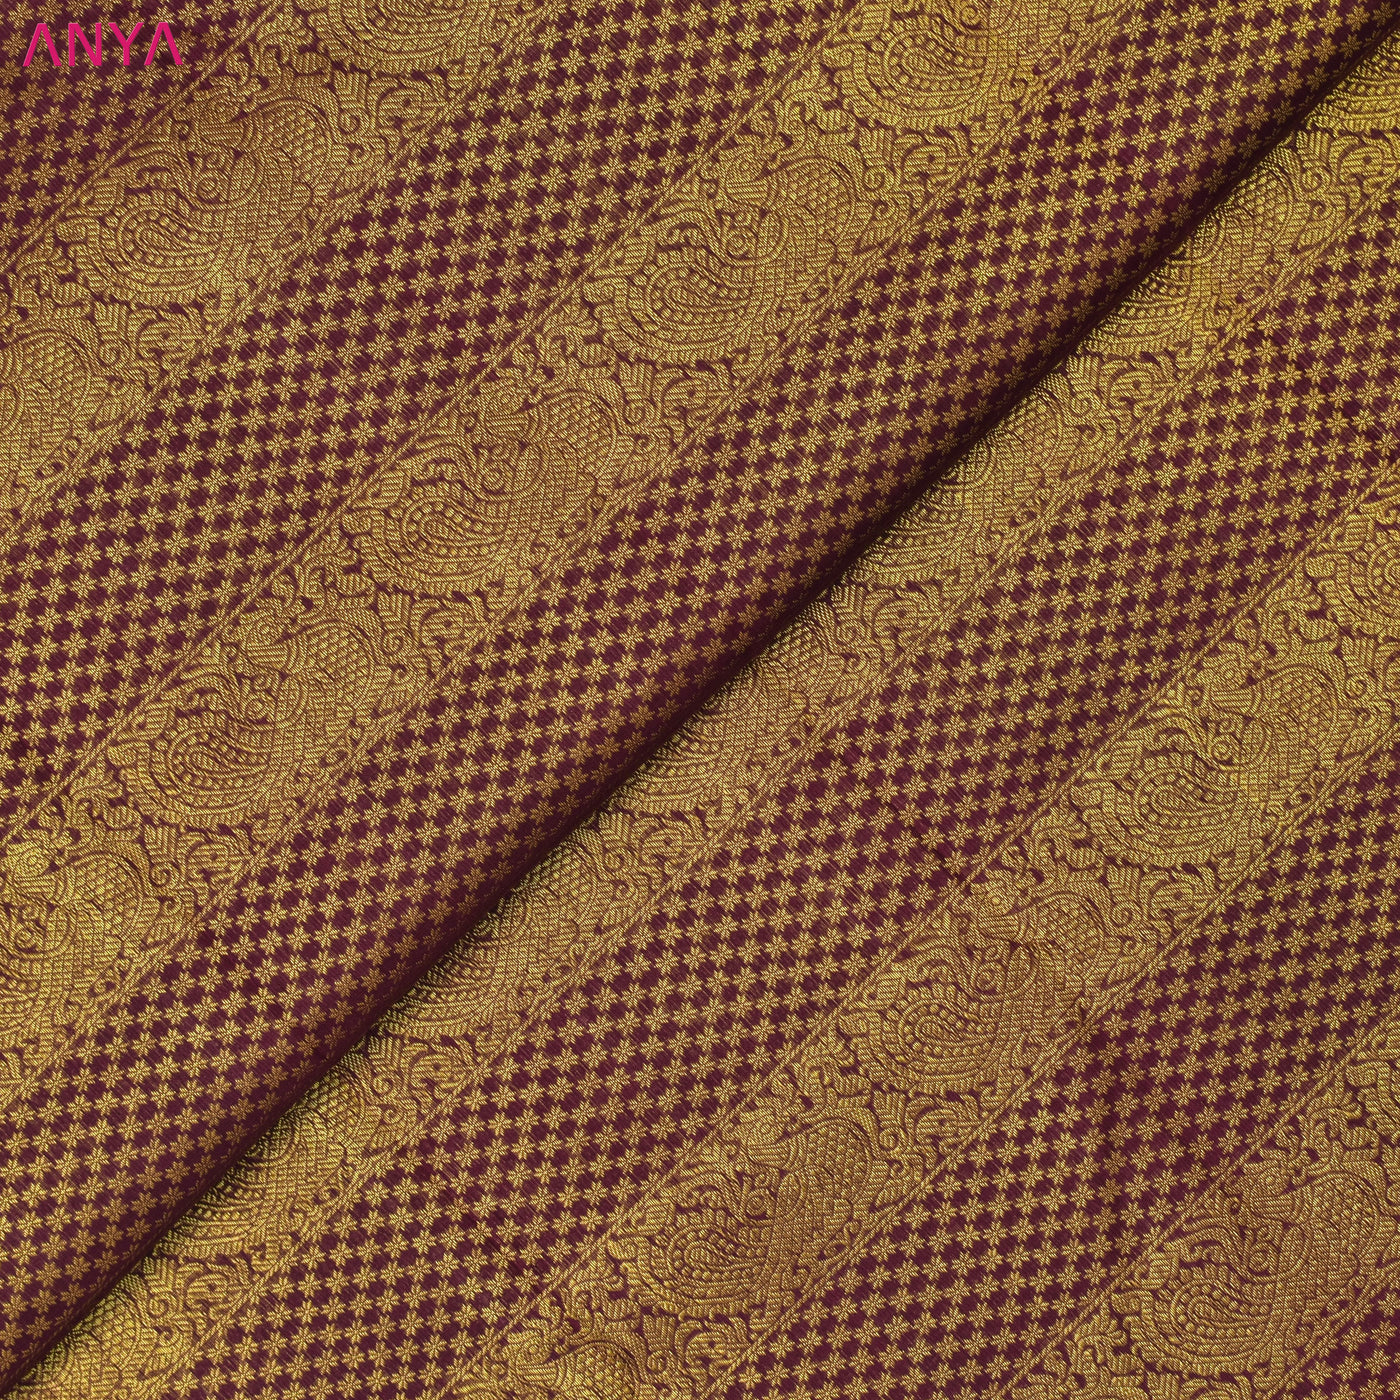 Brown Kanchi Silk Fabric with Annam and Star Butta Design